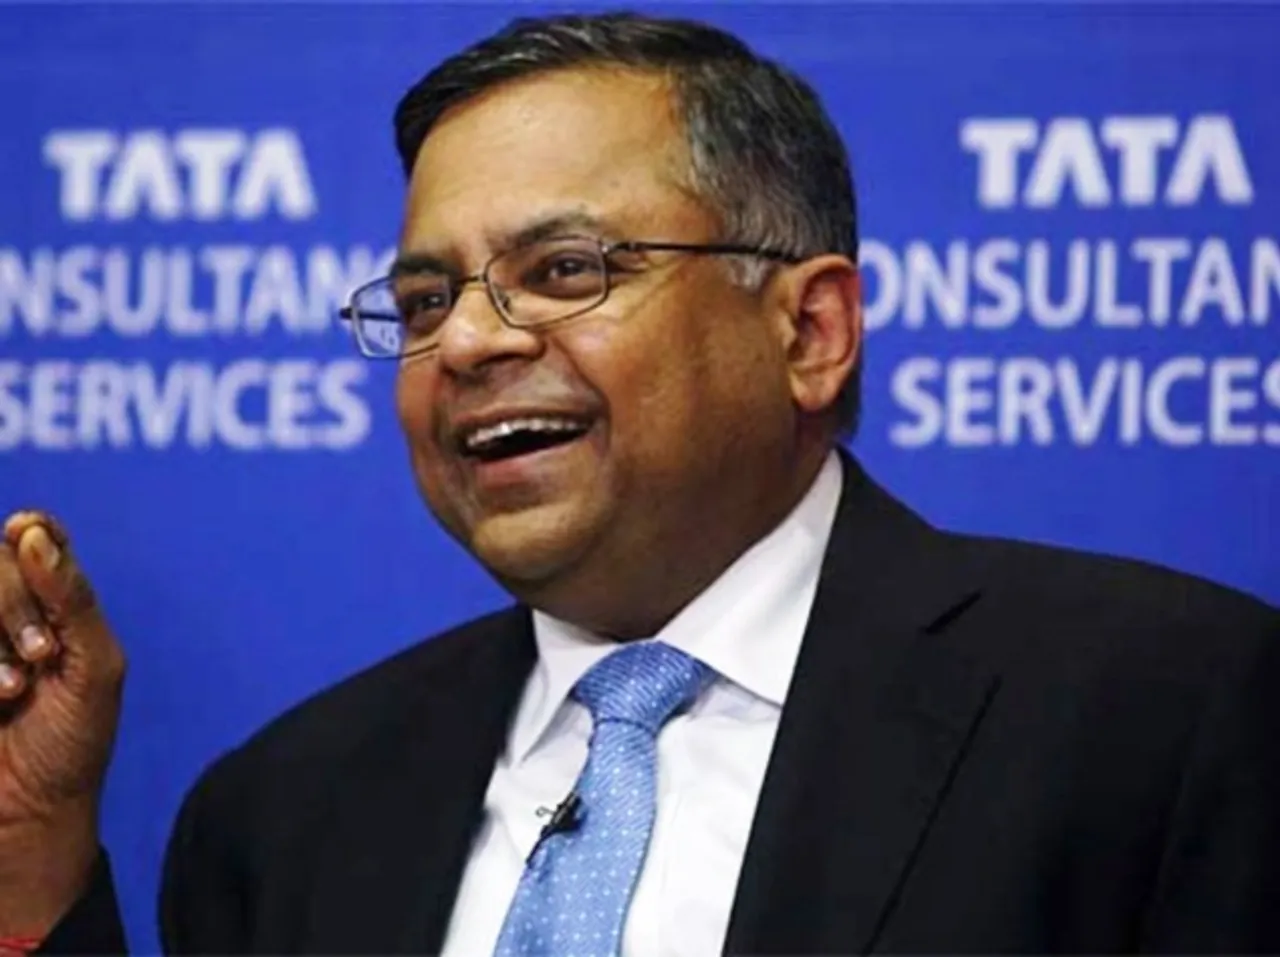 COVID Testing is Essential Tool To Control The Pandemic:  N Chandrasekaran, Tata Group Chief